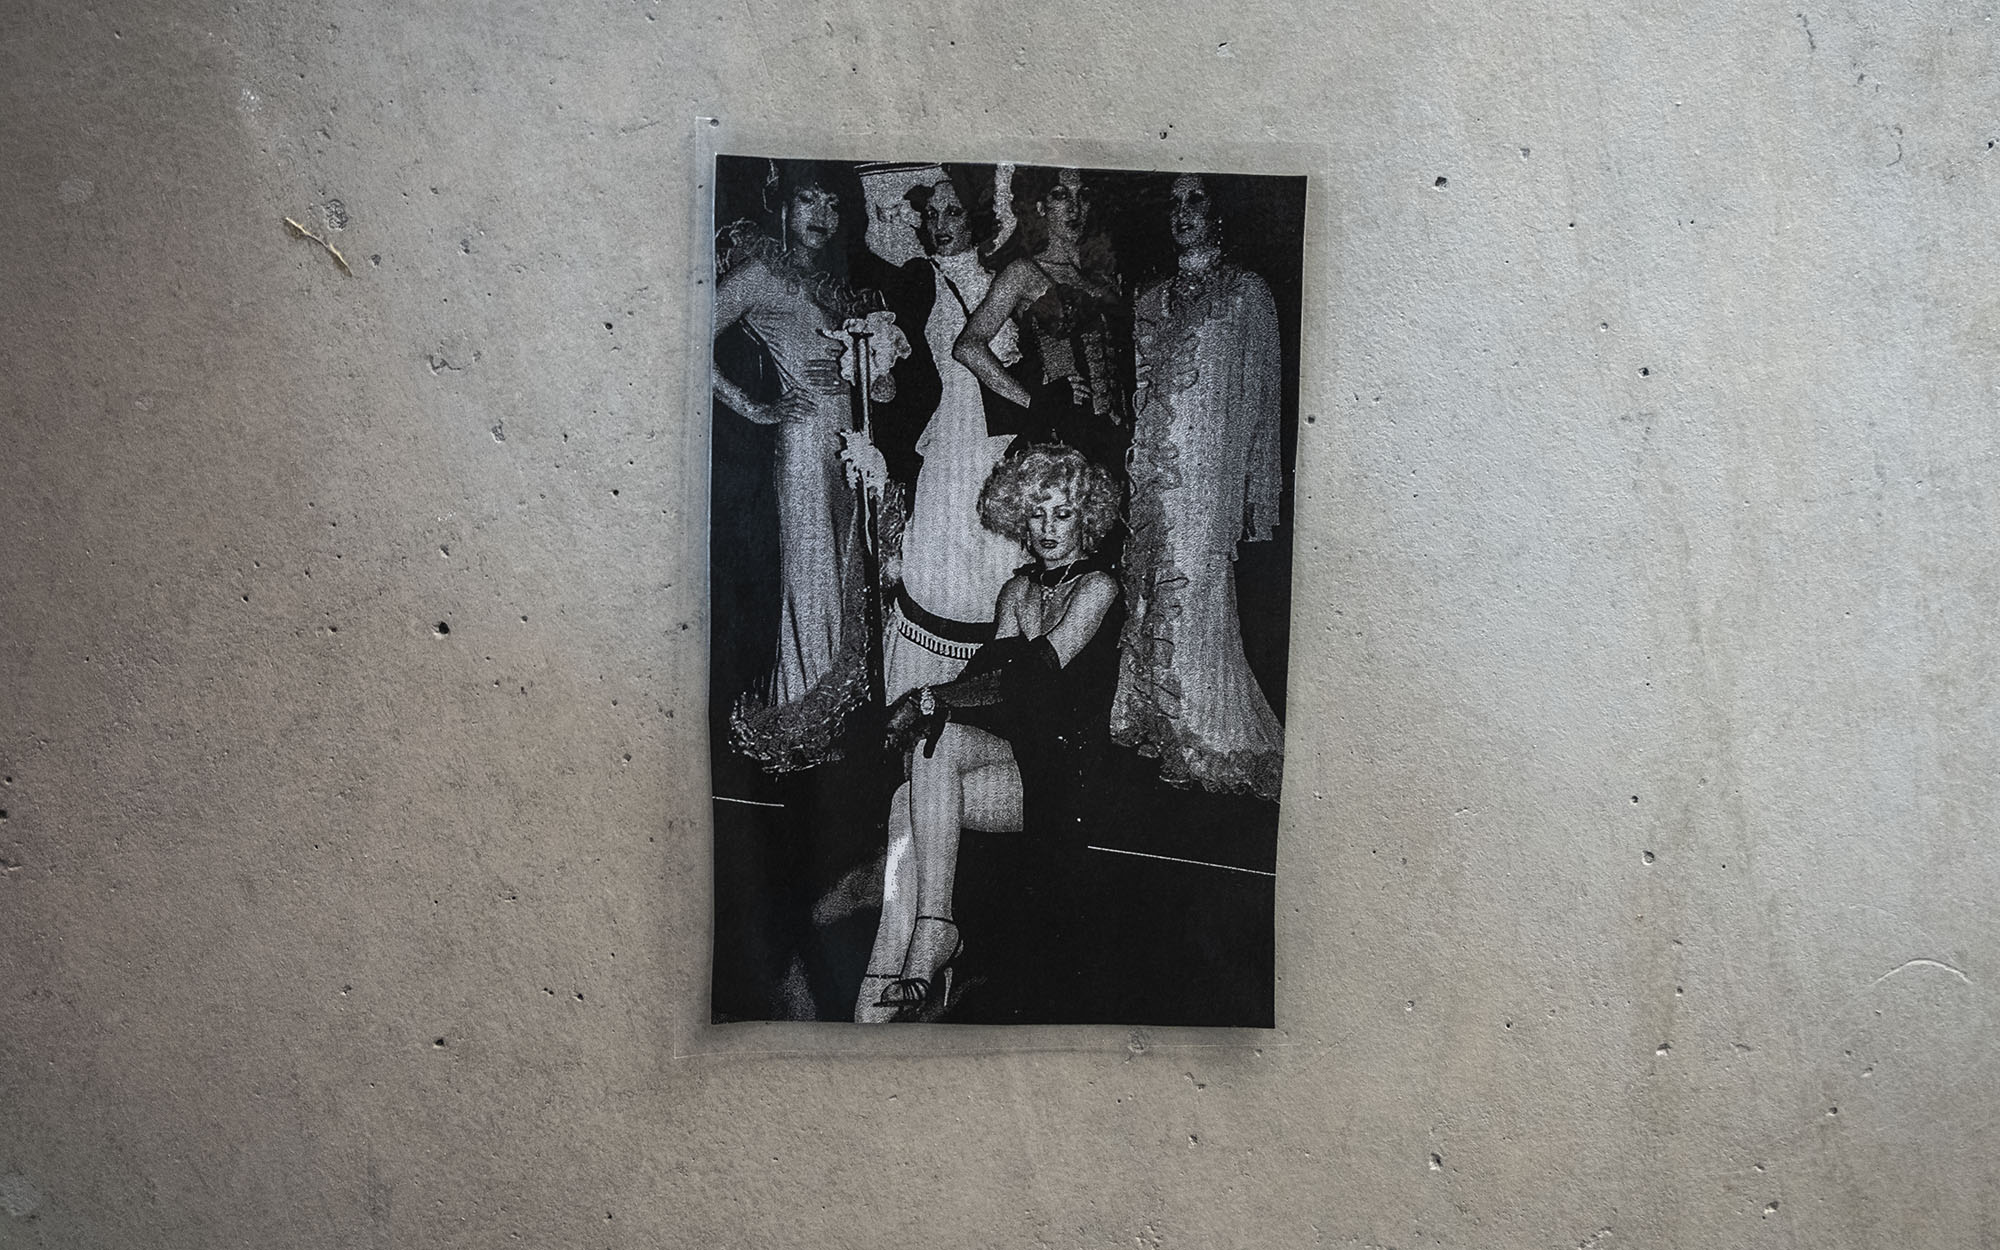 Photo hanging on a concrete wall featuring five people in evening dress